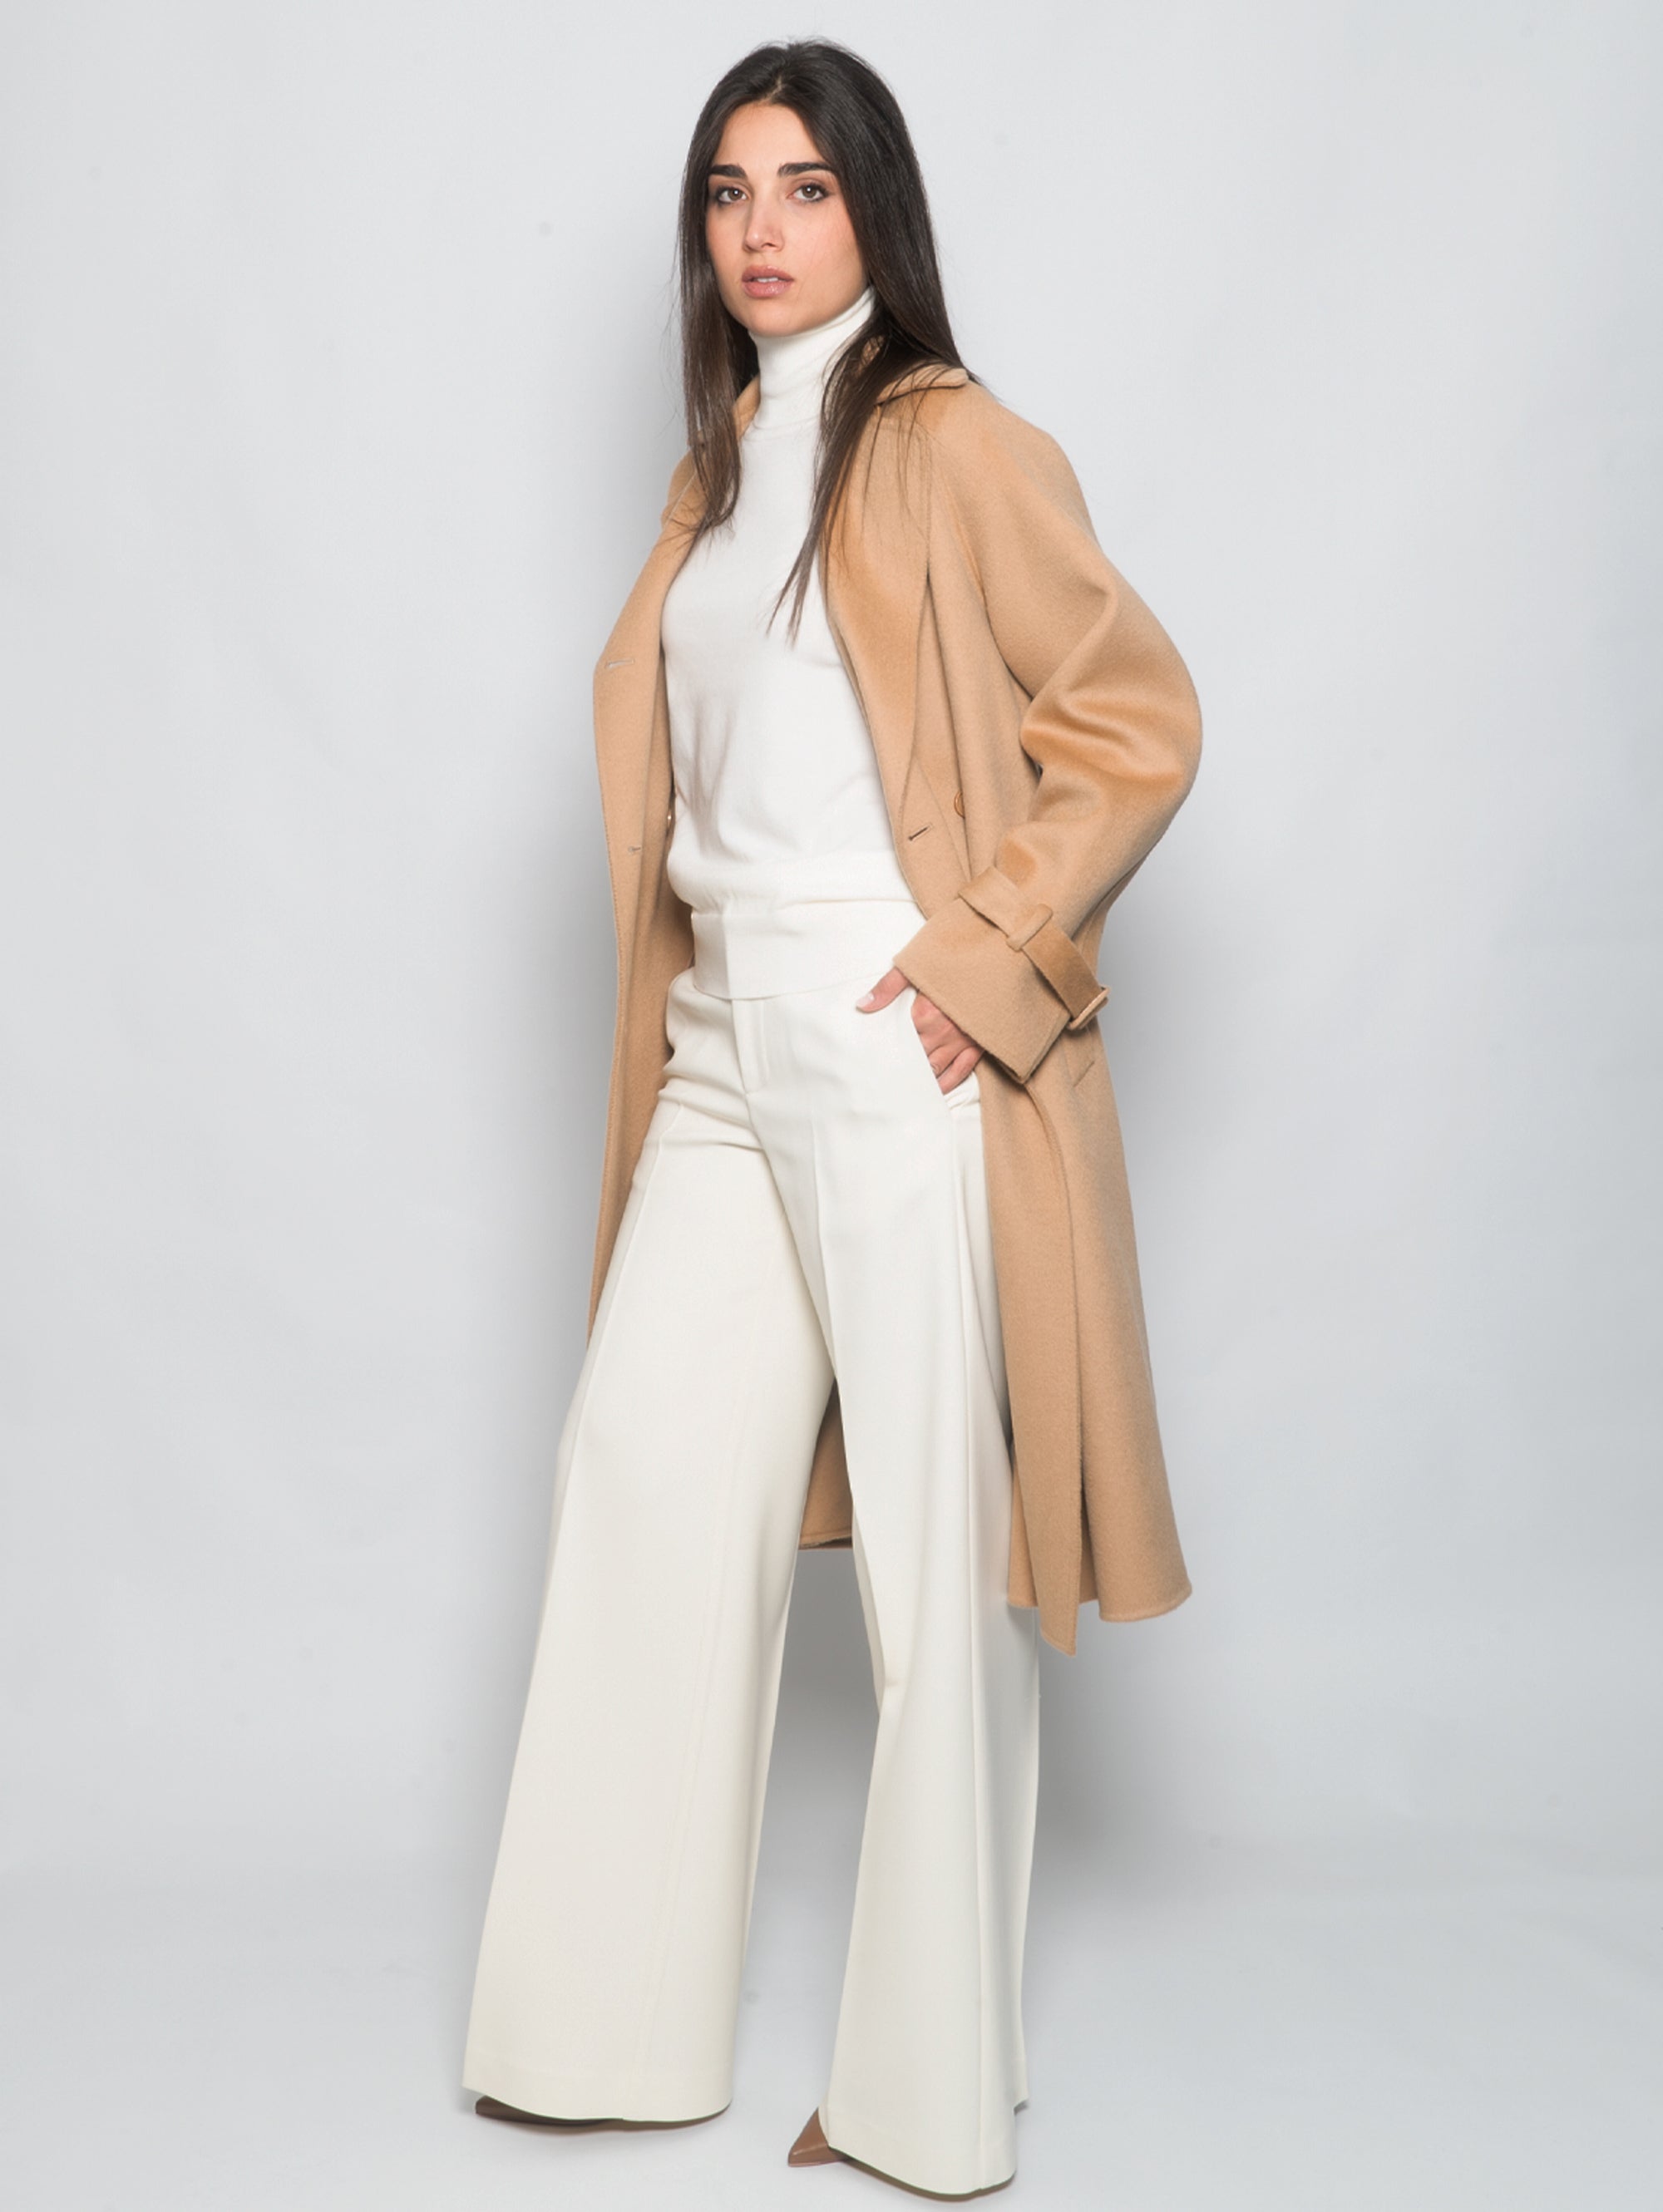 Double-breasted trench coat in beige wool